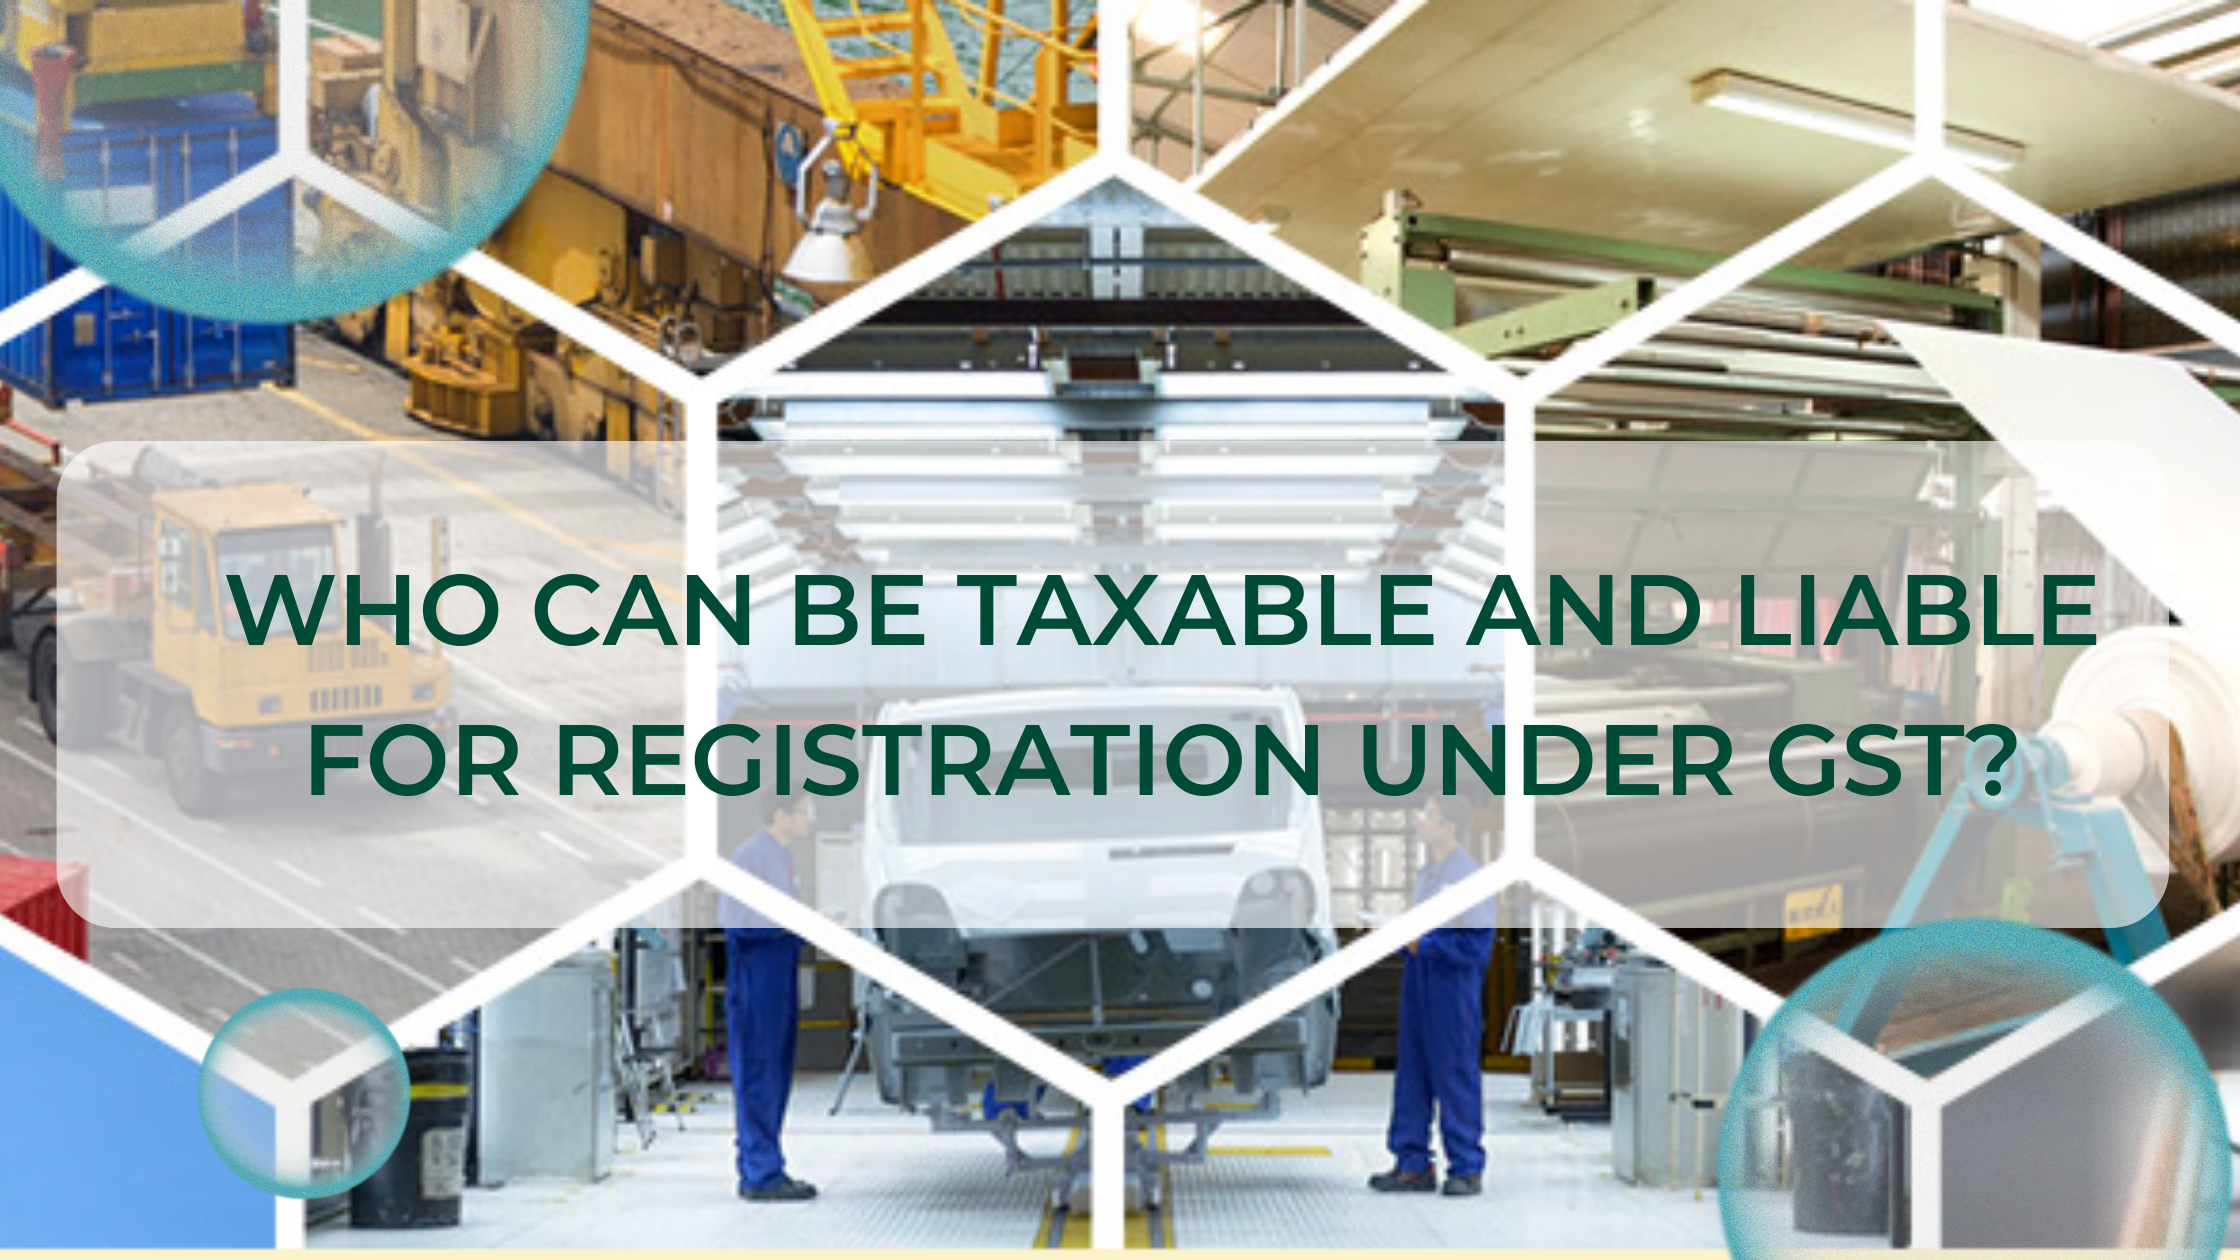 Who Can Be Taxable And Liable for Registration Under GST?